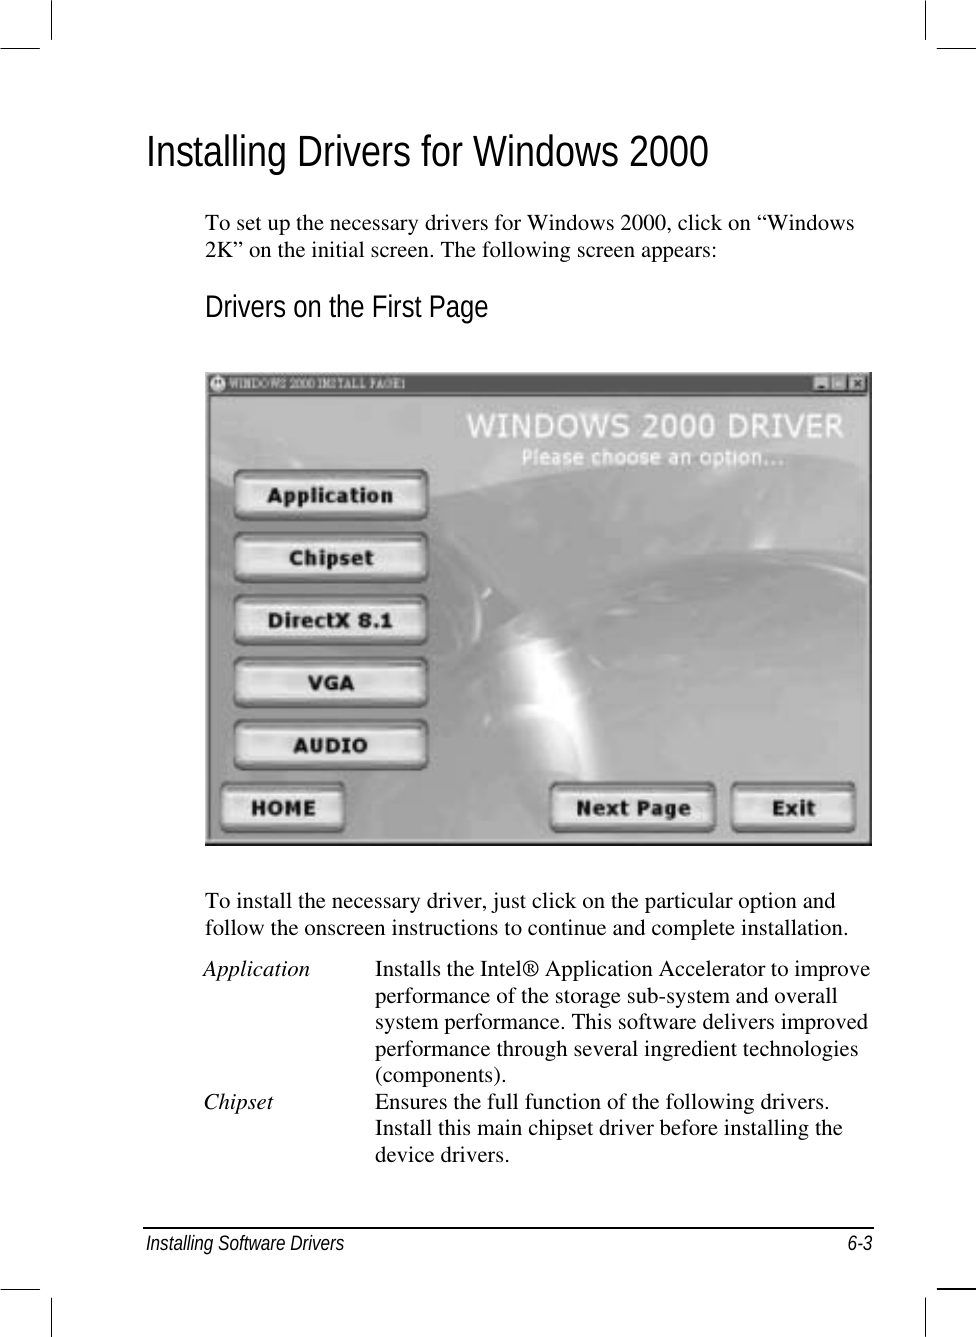  Installing Software Drivers  6-3 Installing Drivers for Windows 2000 To set up the necessary drivers for Windows 2000, click on “Windows 2K” on the initial screen. The following screen appears: Drivers on the First Page  To install the necessary driver, just click on the particular option and follow the onscreen instructions to continue and complete installation. Application  Installs the Intel® Application Accelerator to improve performance of the storage sub-system and overall system performance. This software delivers improved performance through several ingredient technologies (components). Chipset  Ensures the full function of the following drivers. Install this main chipset driver before installing the device drivers. 